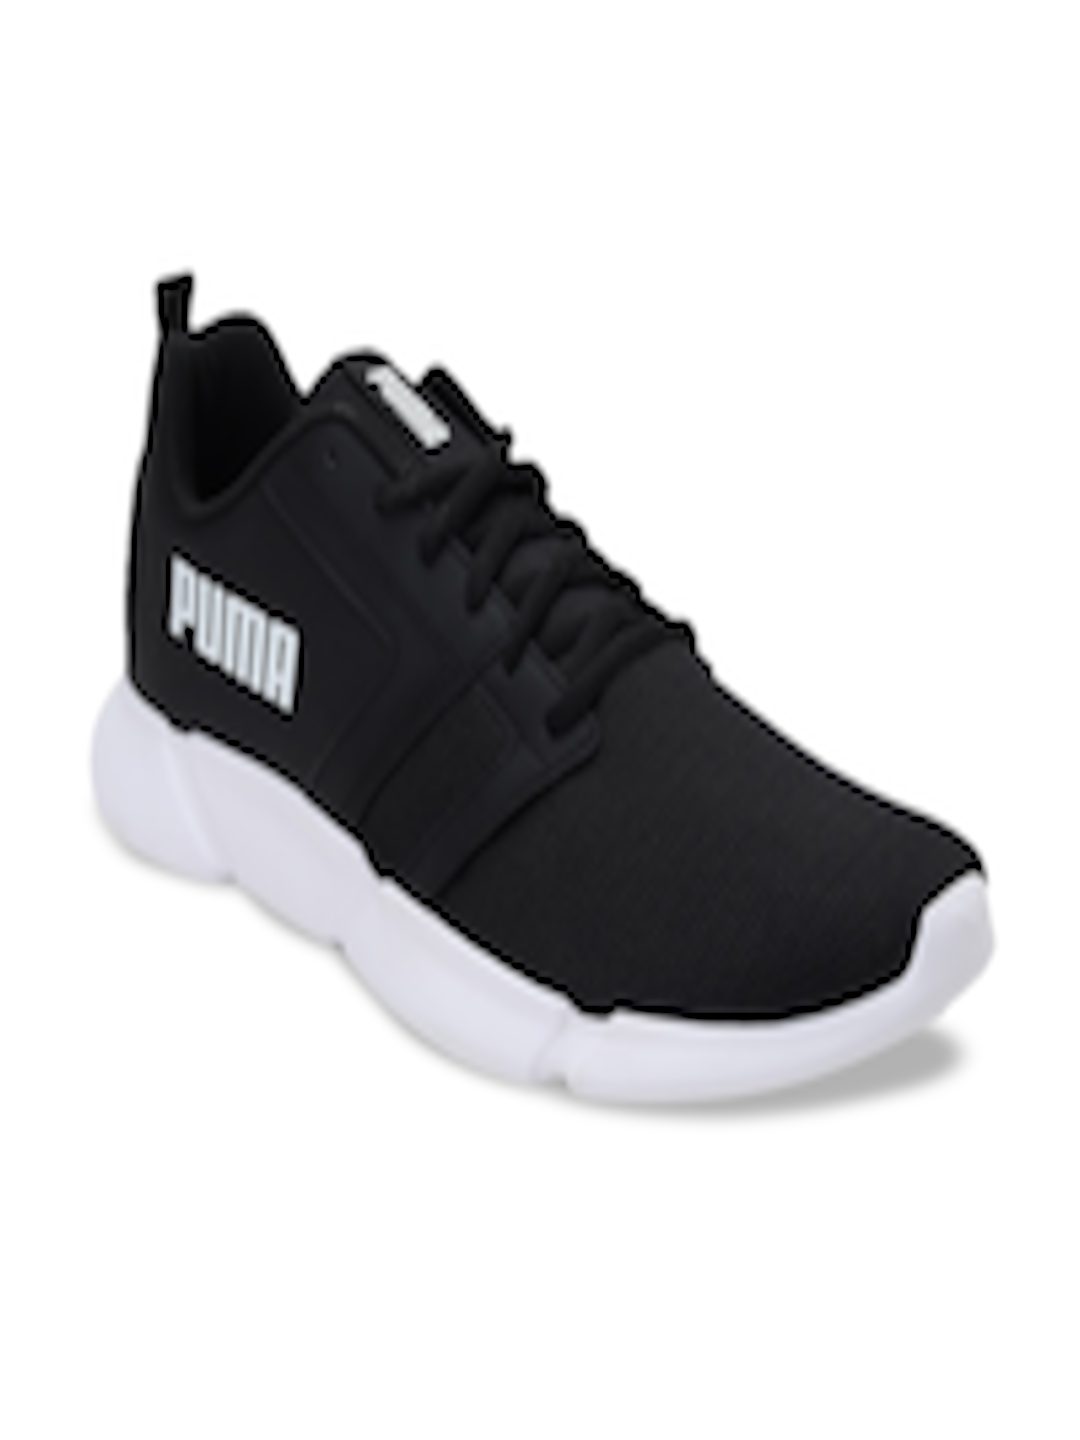 Buy Puma Unisex Black & White Flair Running Shoes - Sports Shoes for ...